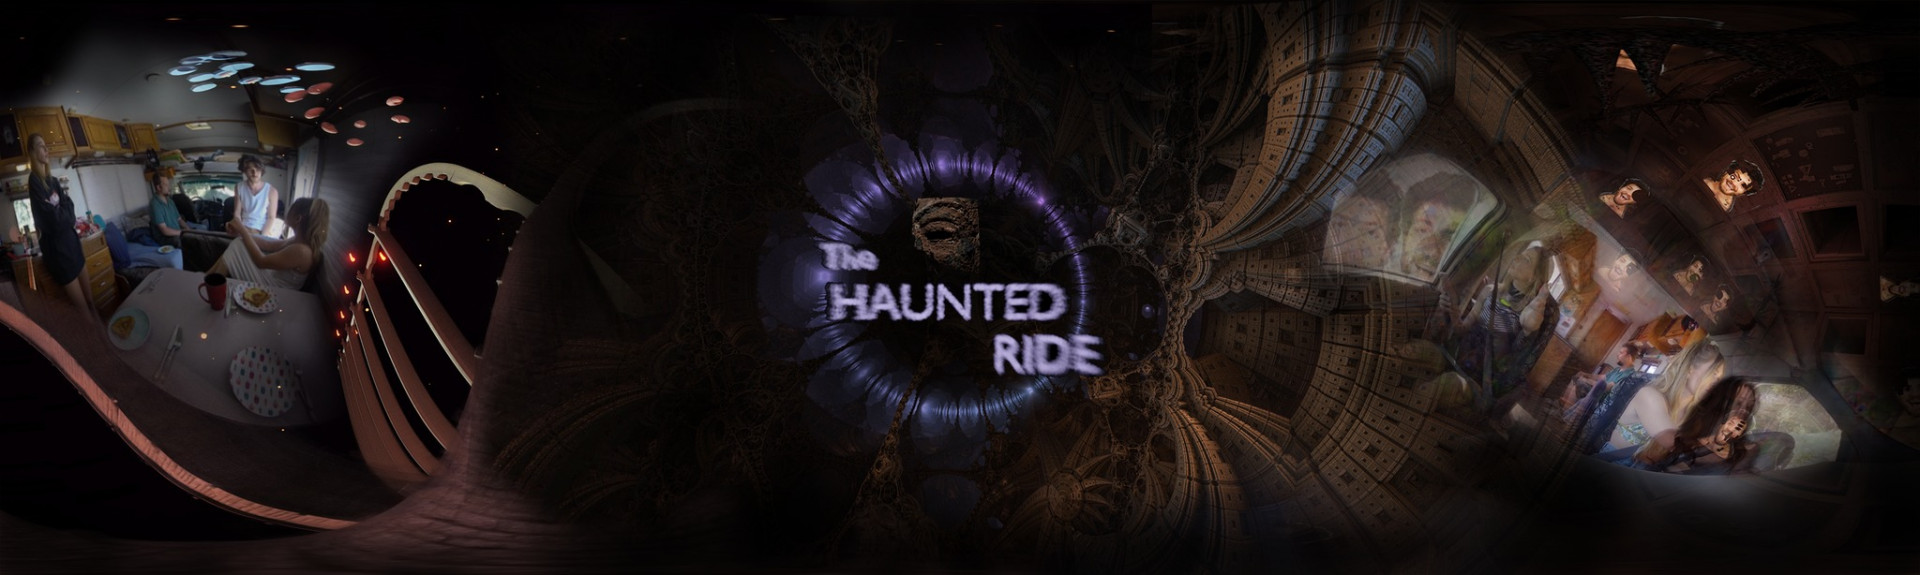 The Haunted Ride - A VR Horror Series